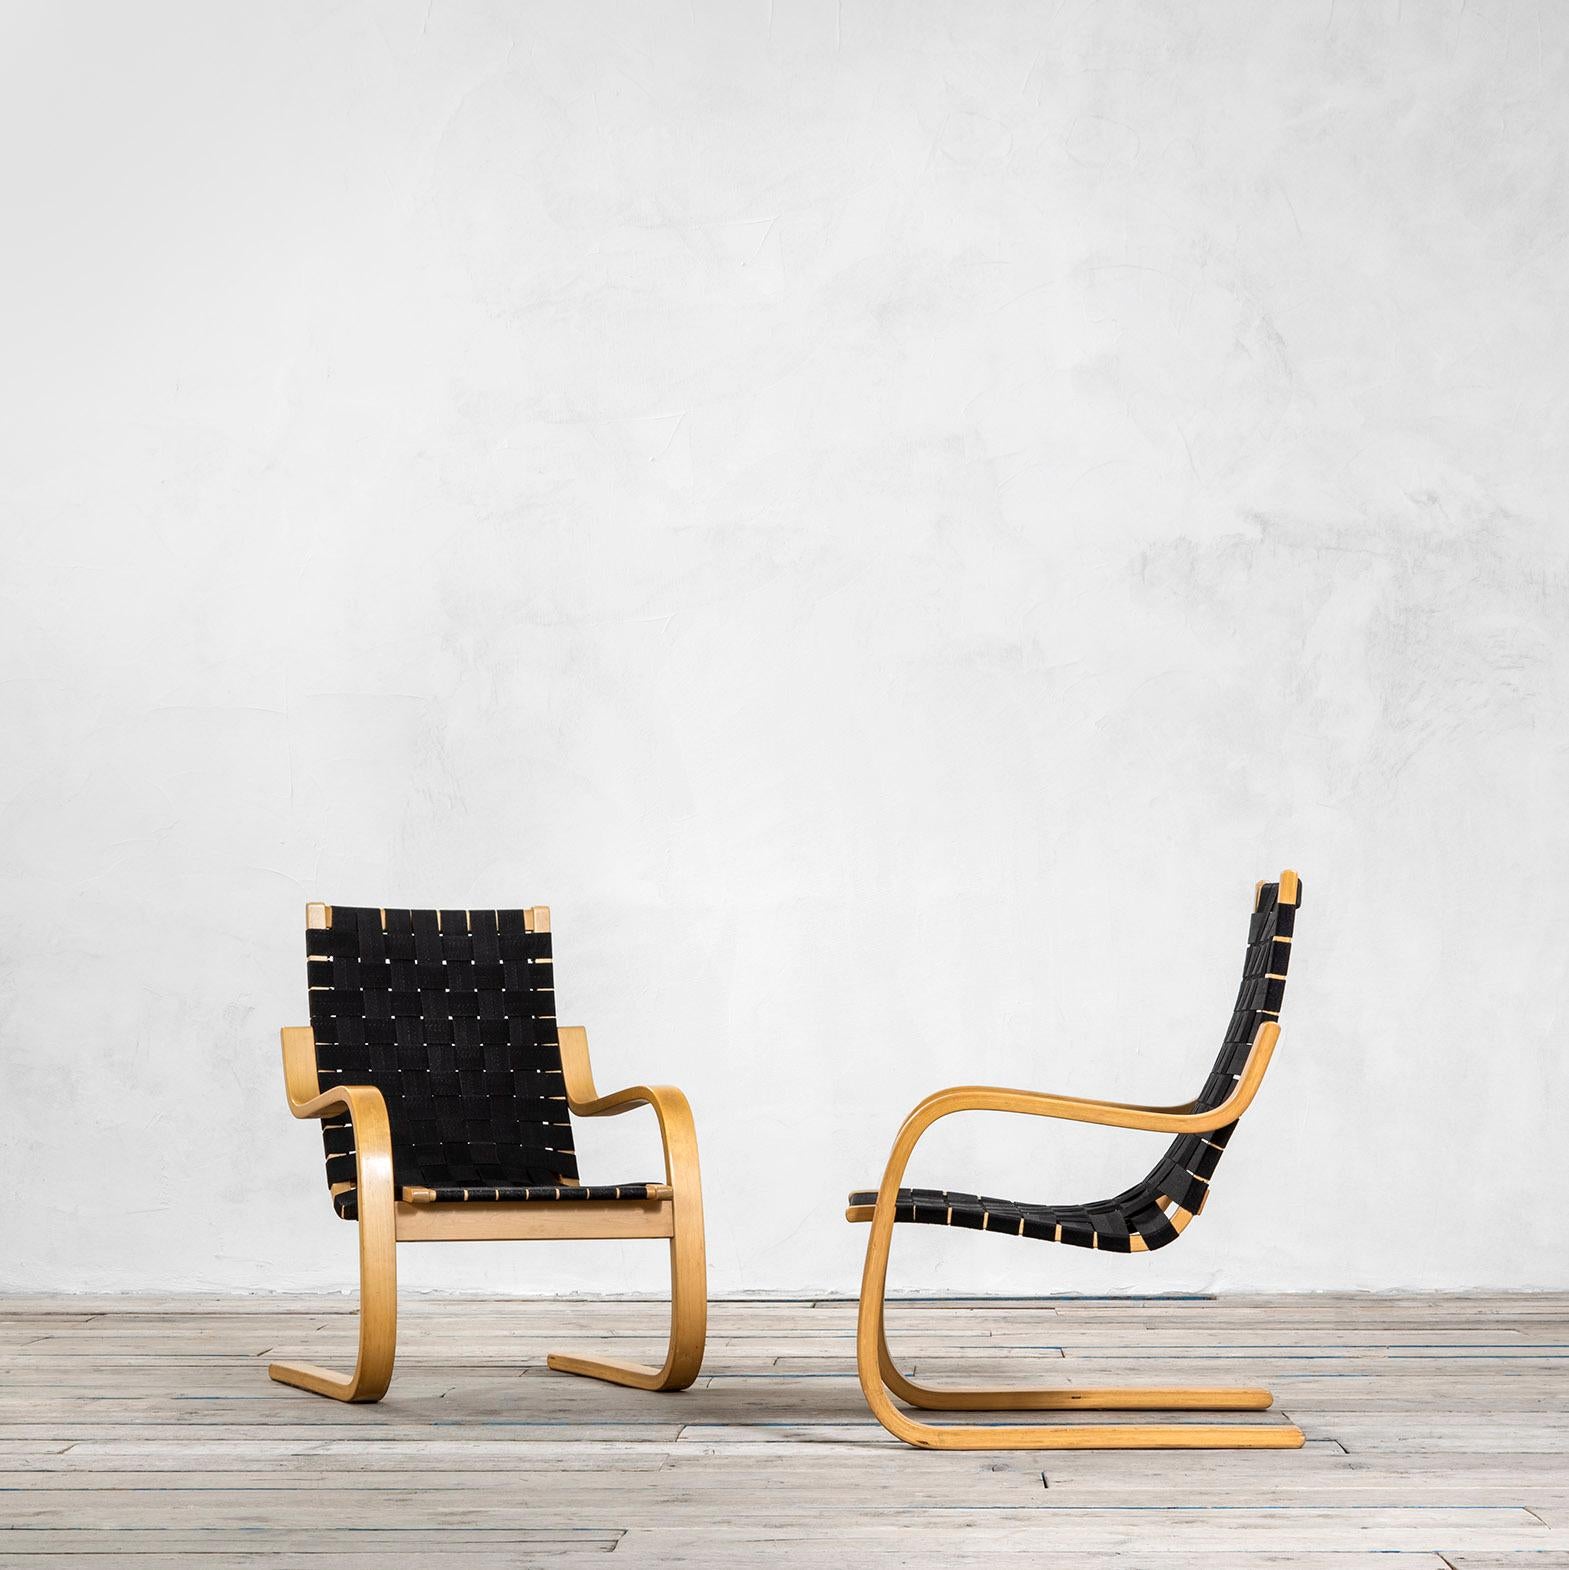 Couple of armchairs designed by Alvar Aalto model n. 406 for Artek. The structure is in curved birch wood and the seating is in strips of black fabric. 
Published in: C & P. Fiell, 1000 Chairs, p. 281, Taschen, 2006, pag. 165.
Good condition,